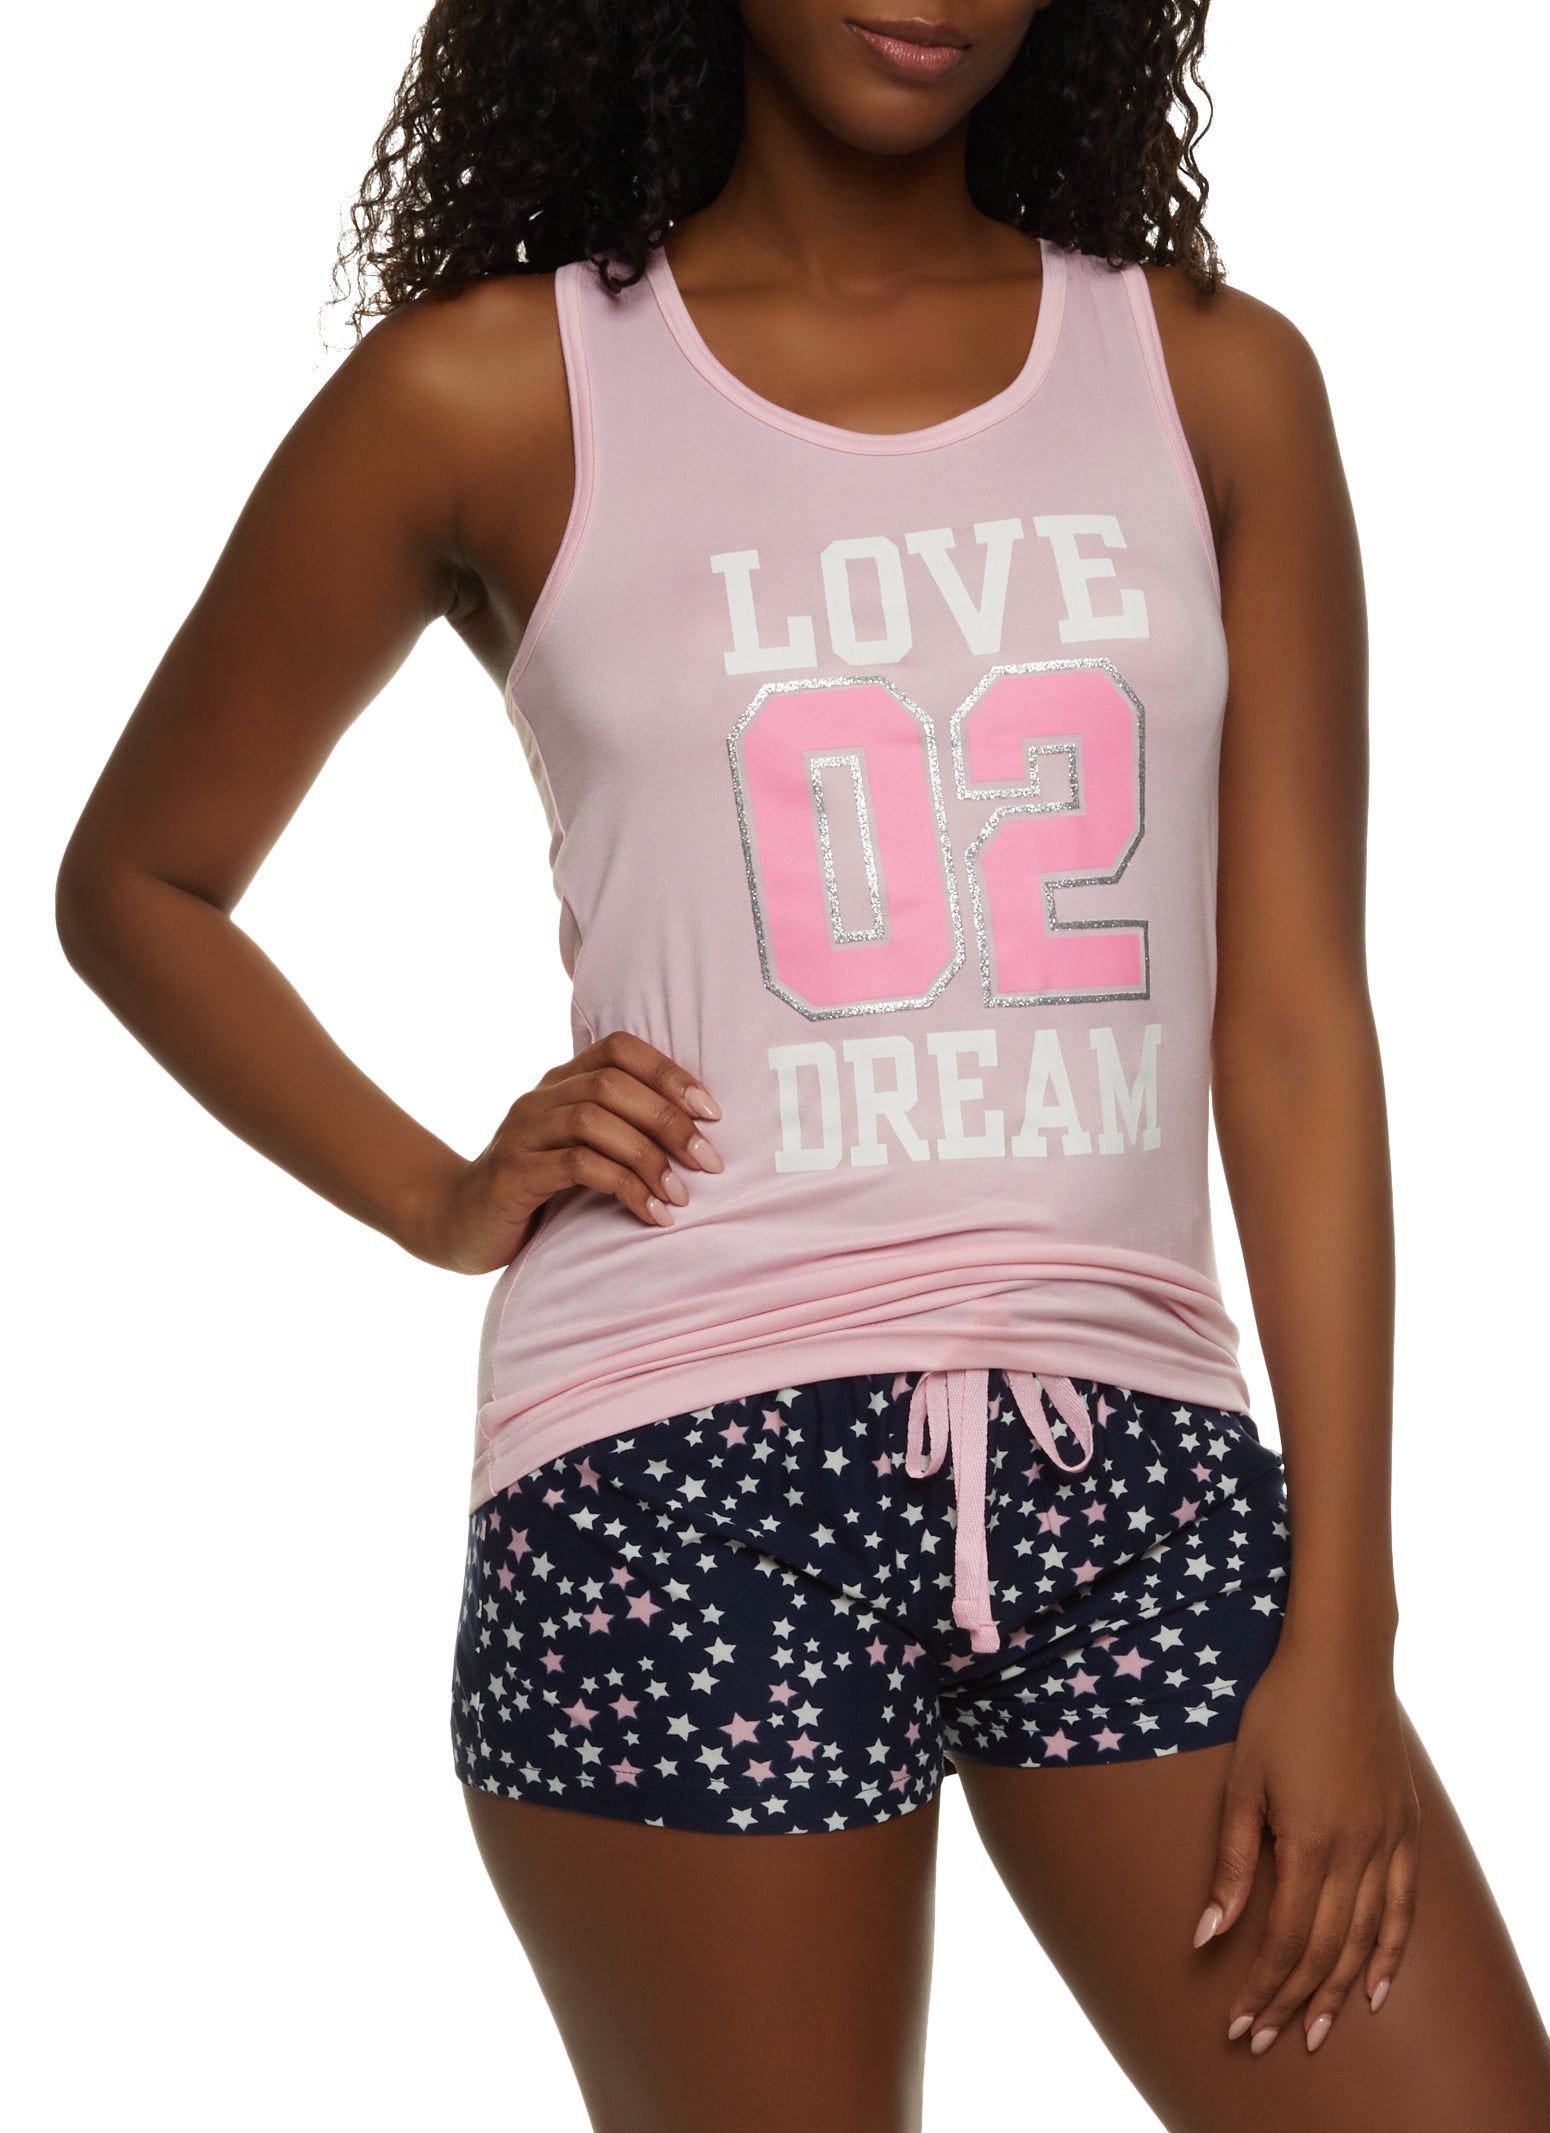 Womens Love 02 Dream Pajama Tank Top and Printed Shorts, Multi, Size L